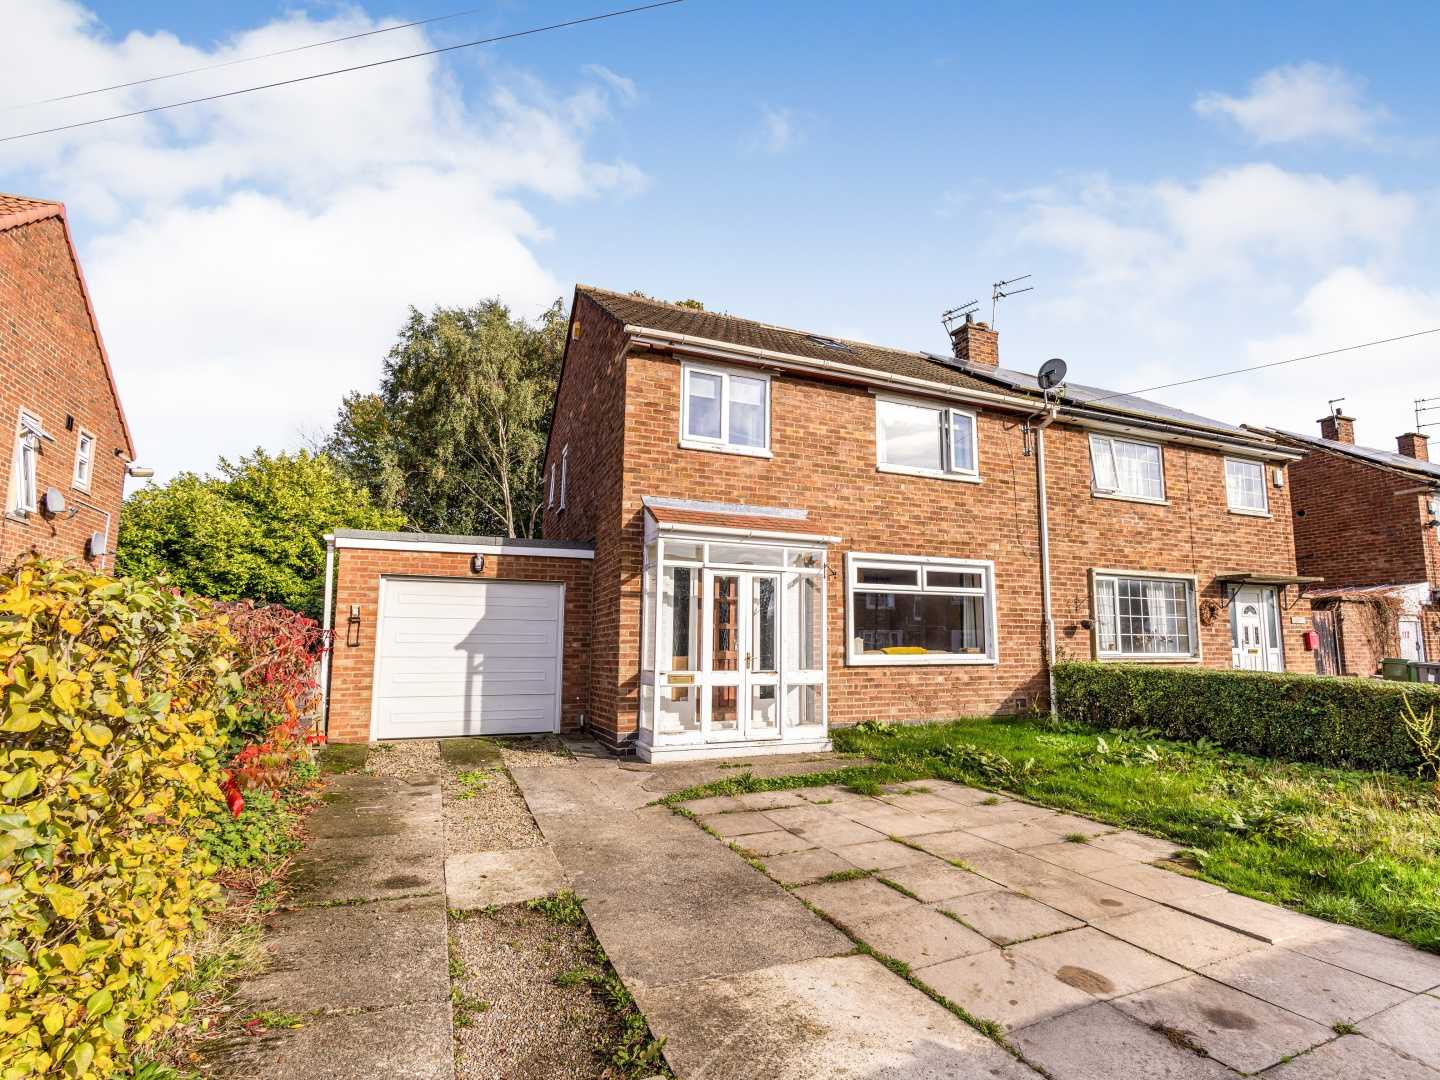 House in Acomb, York 11125554